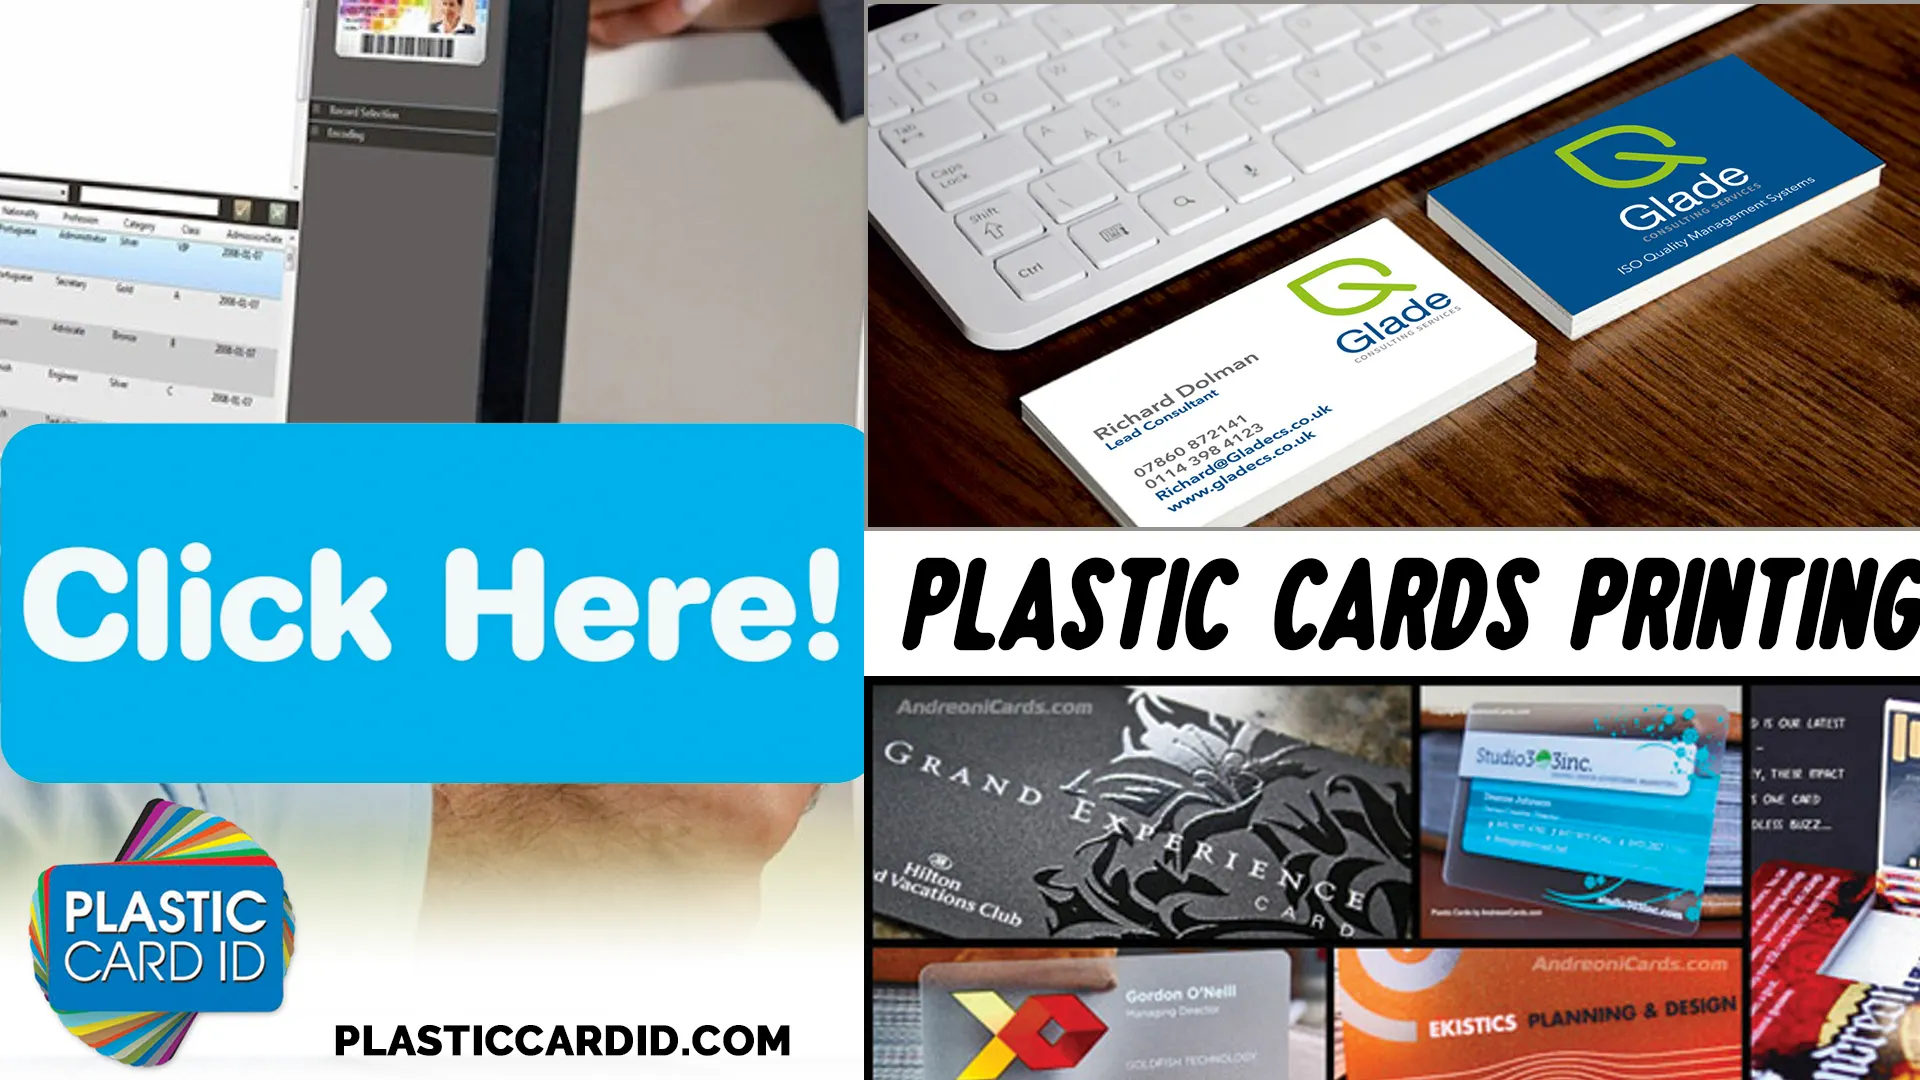 Welcome to Sustainable Solutions for Plastic Card Disposal